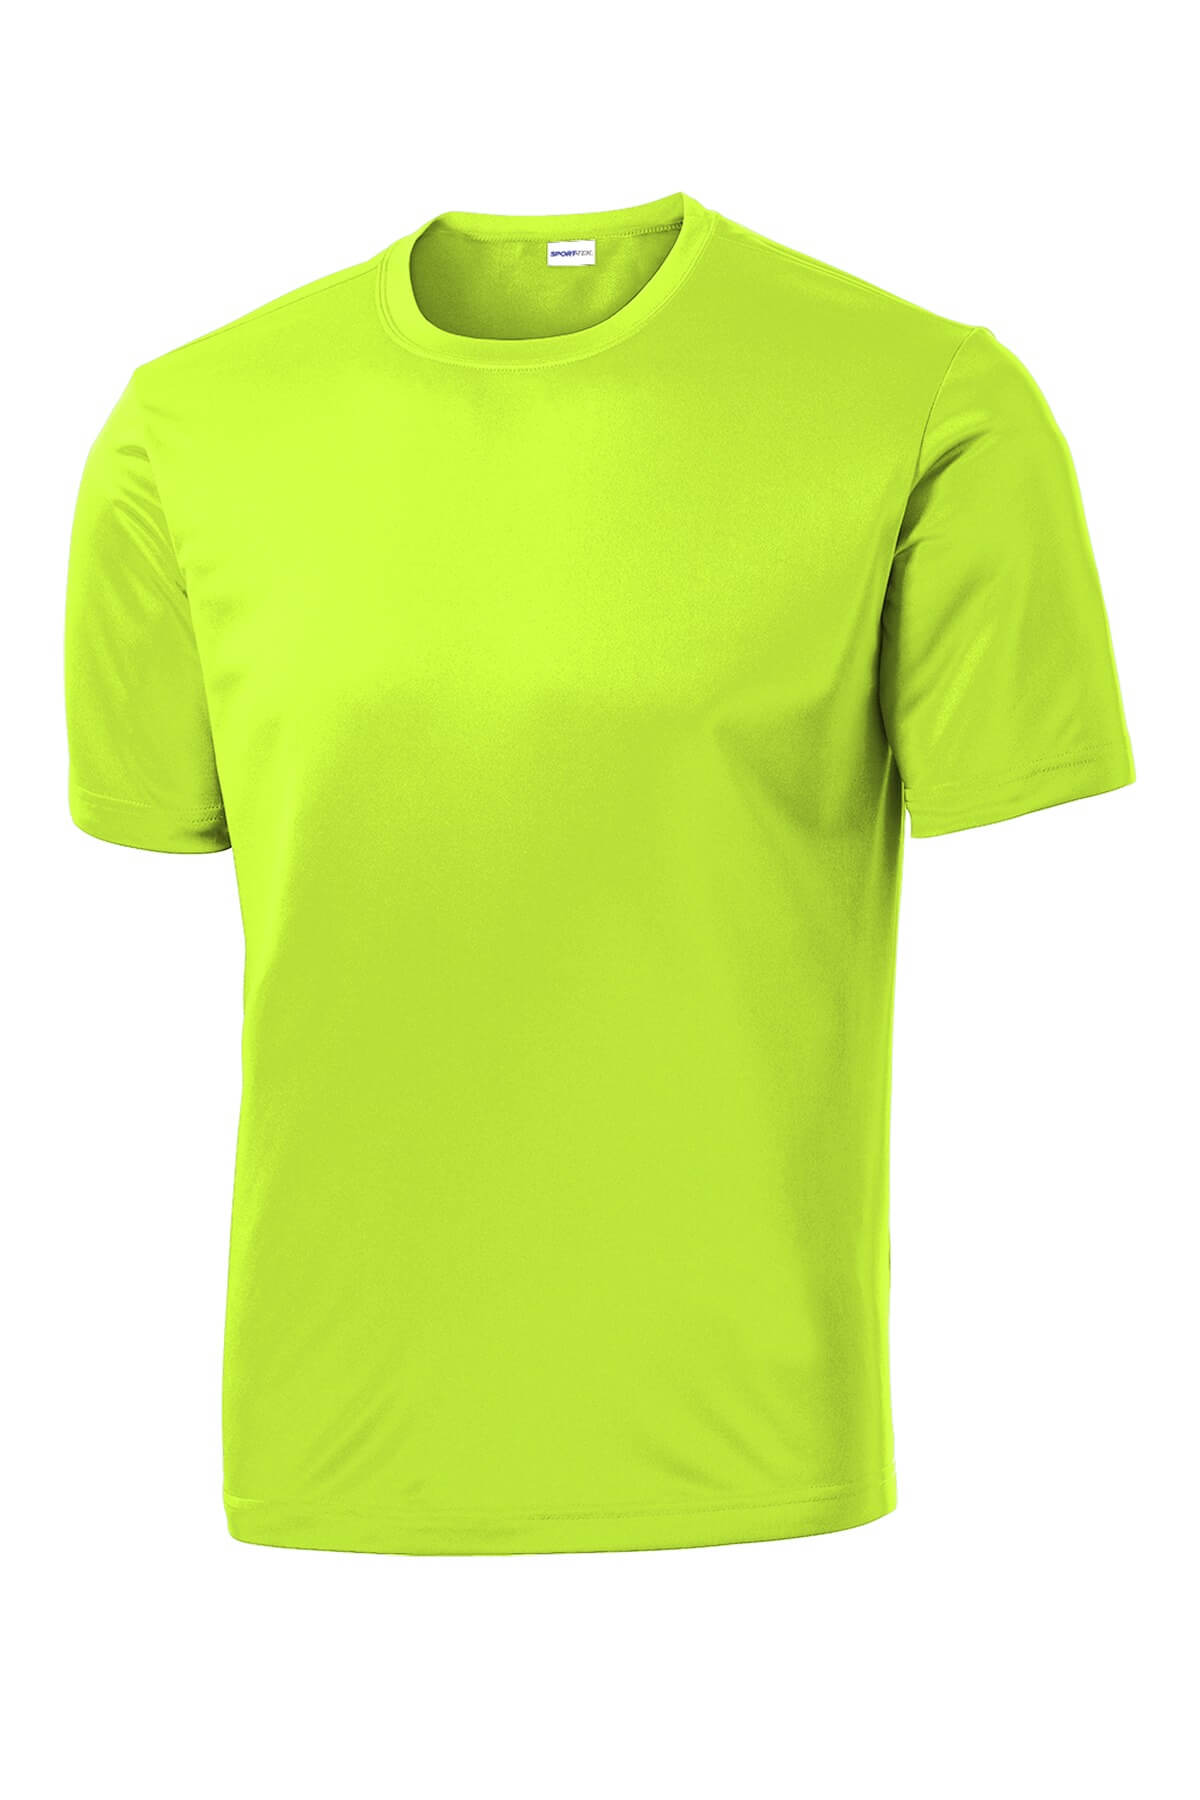 PosiCharge Competitor Tee (ST350) - High-Visibility Shirts